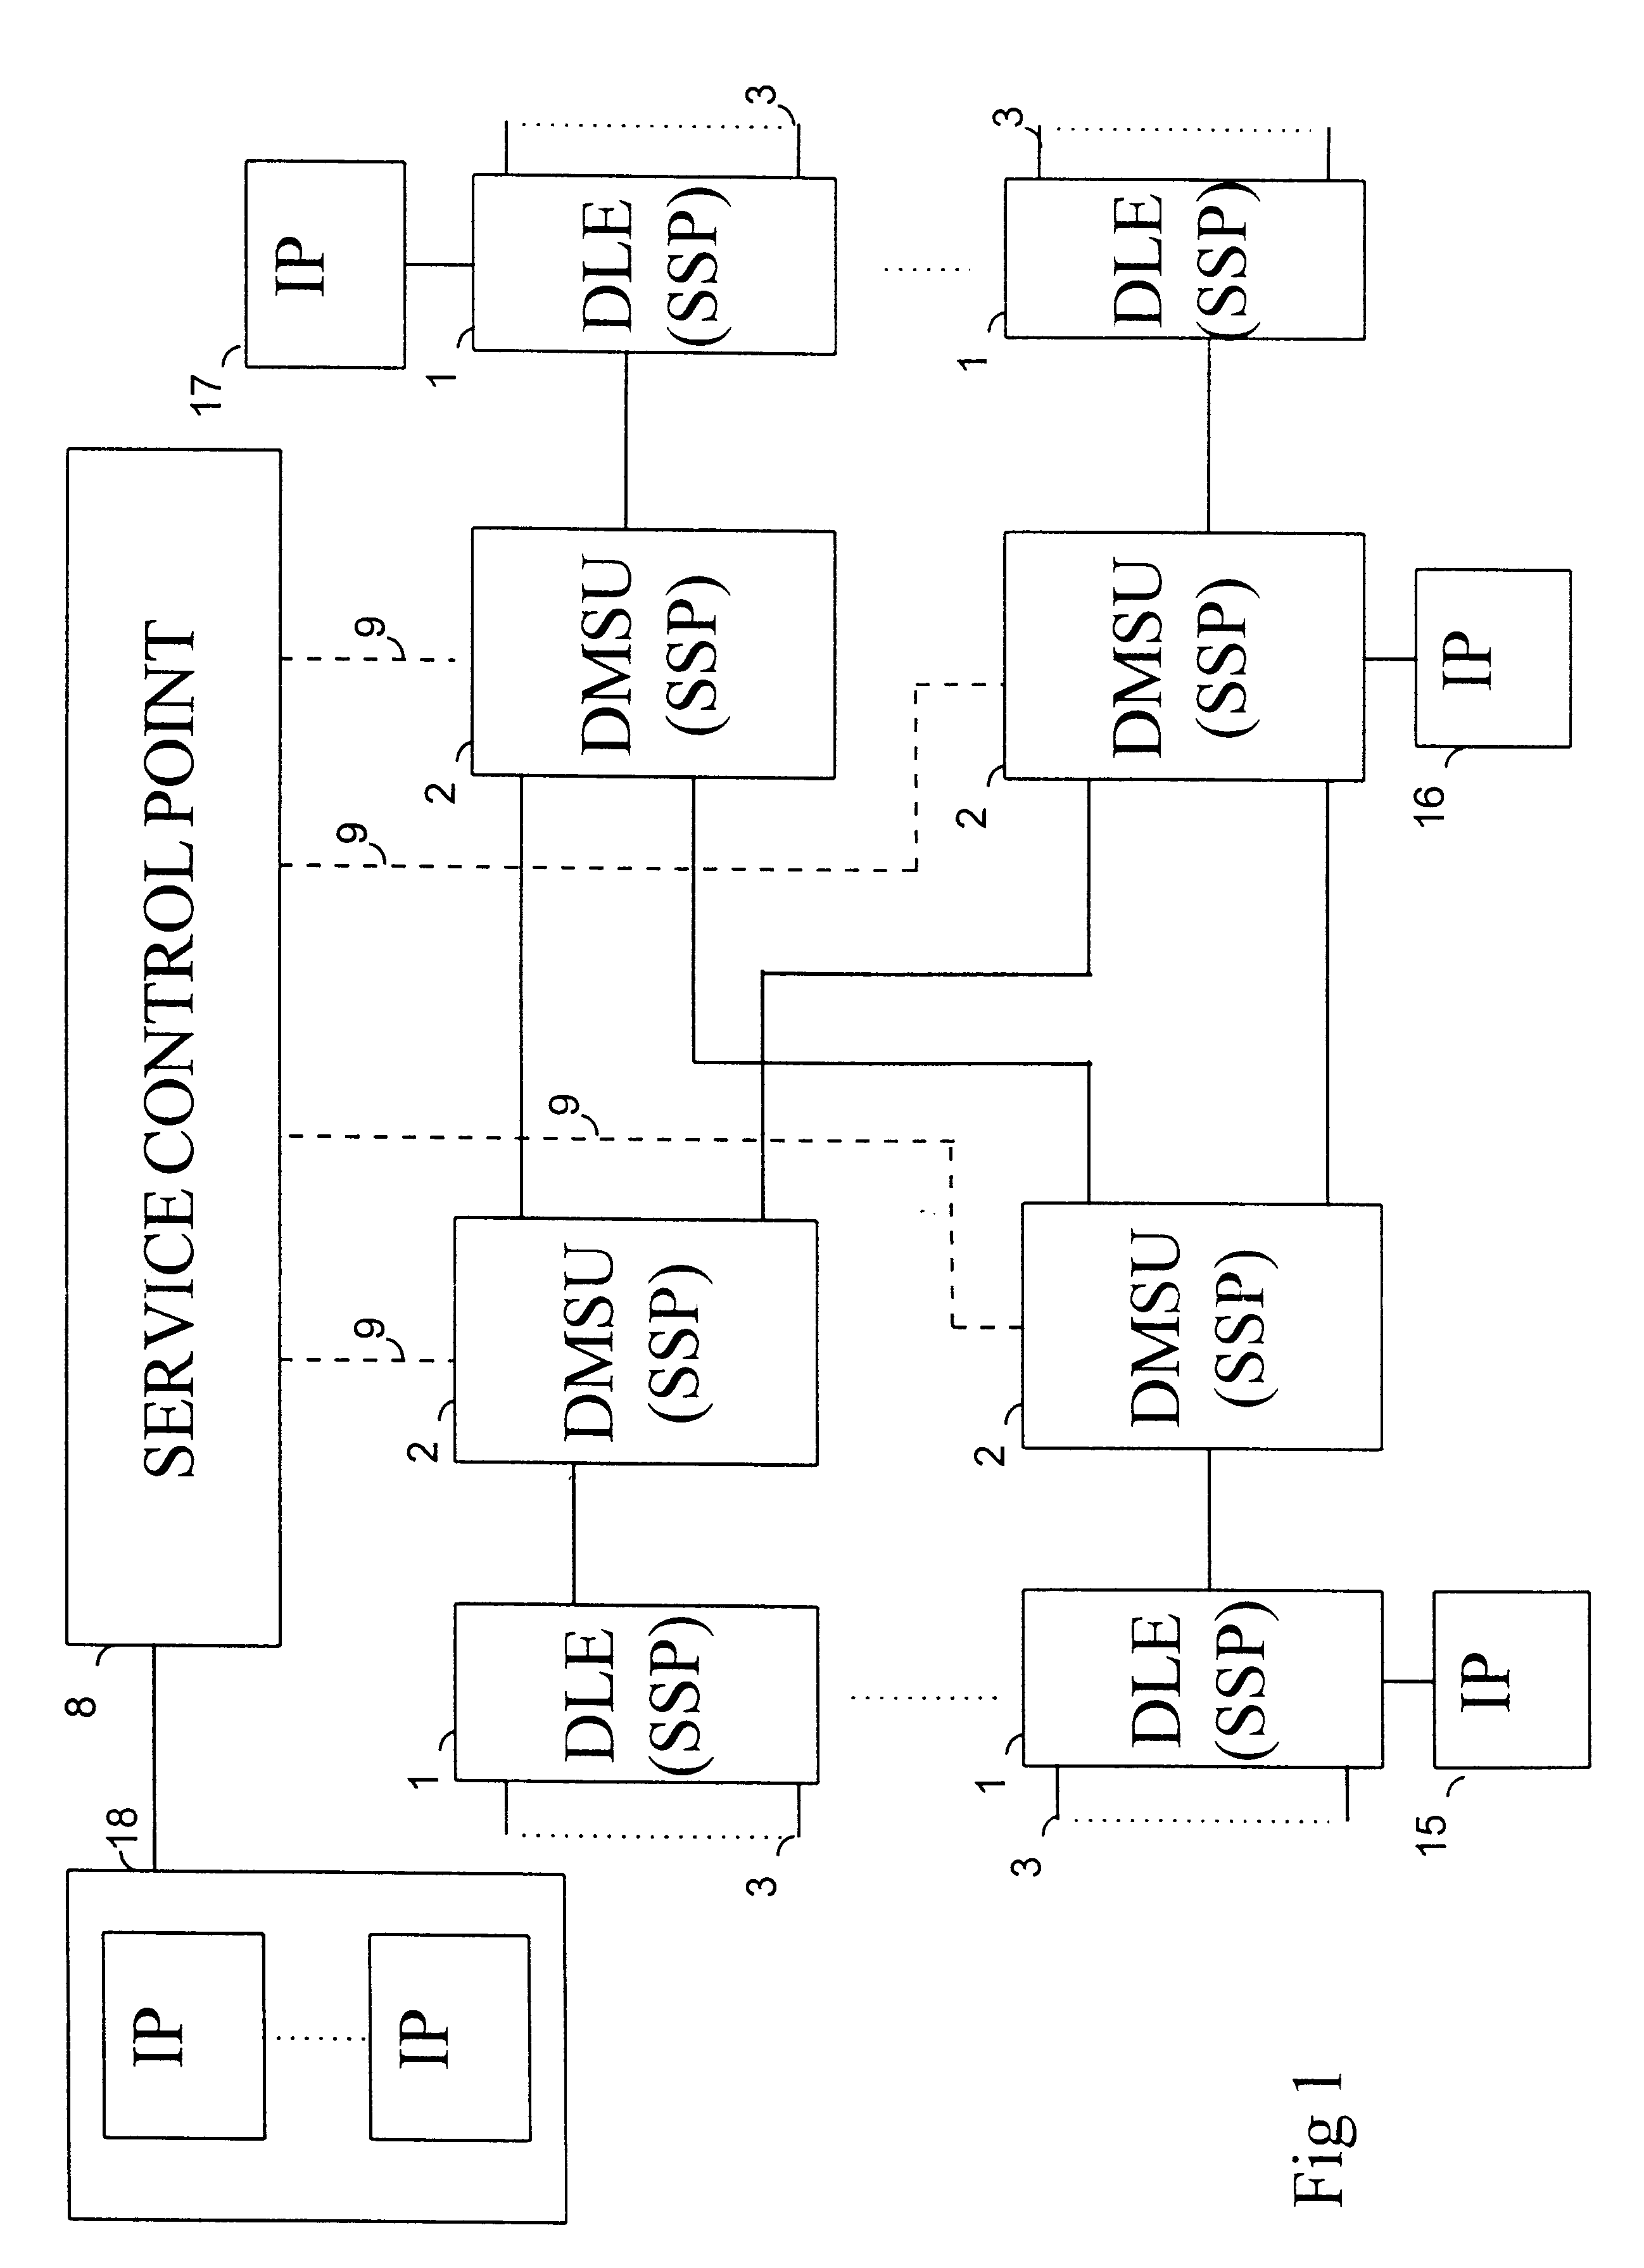 System for controlling telecommunication overload traffic